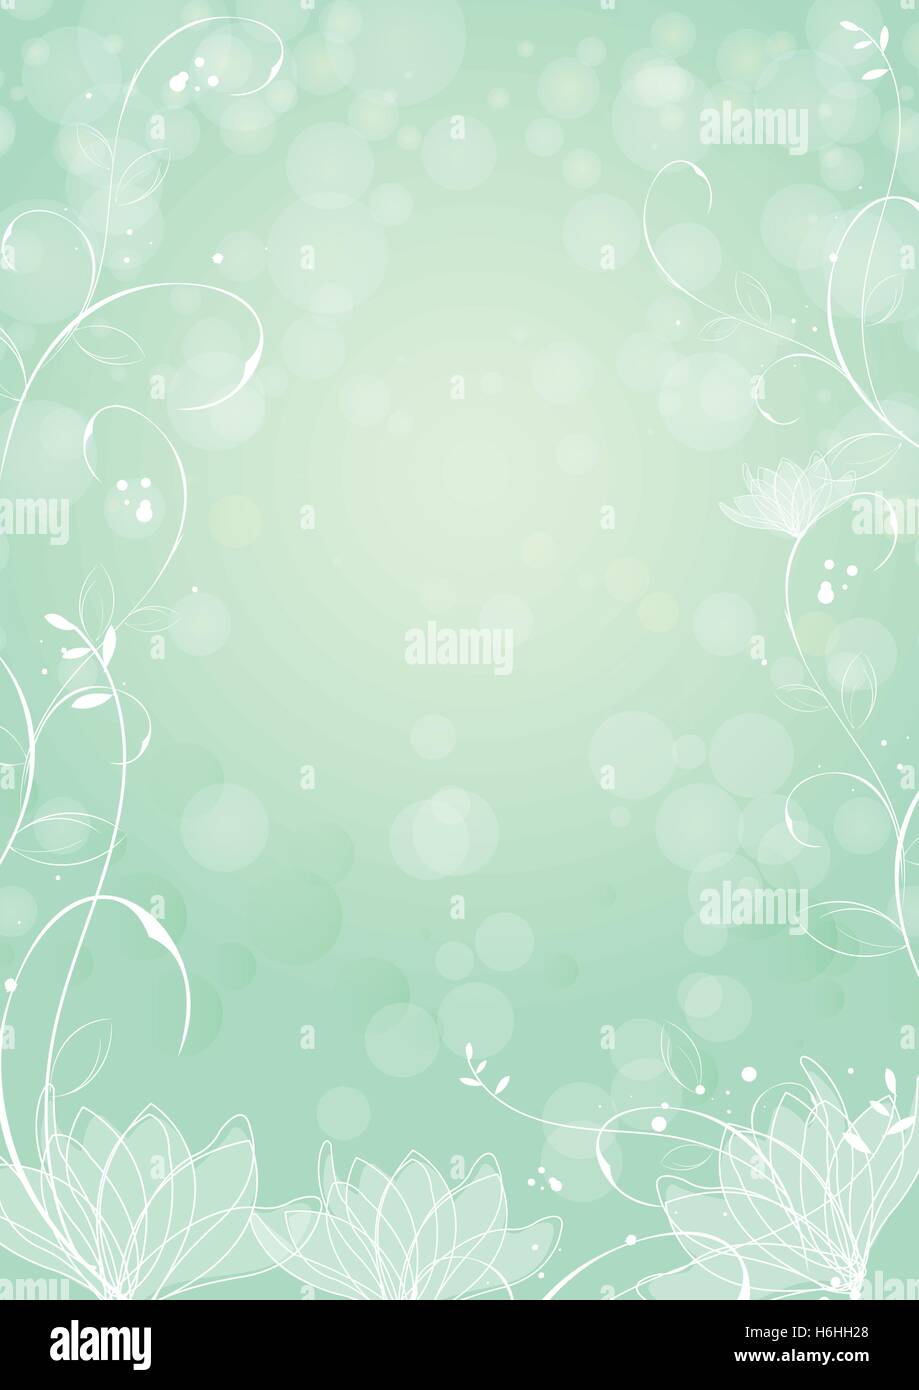 Gradient green paper background with border lotus and plants Stock Vector